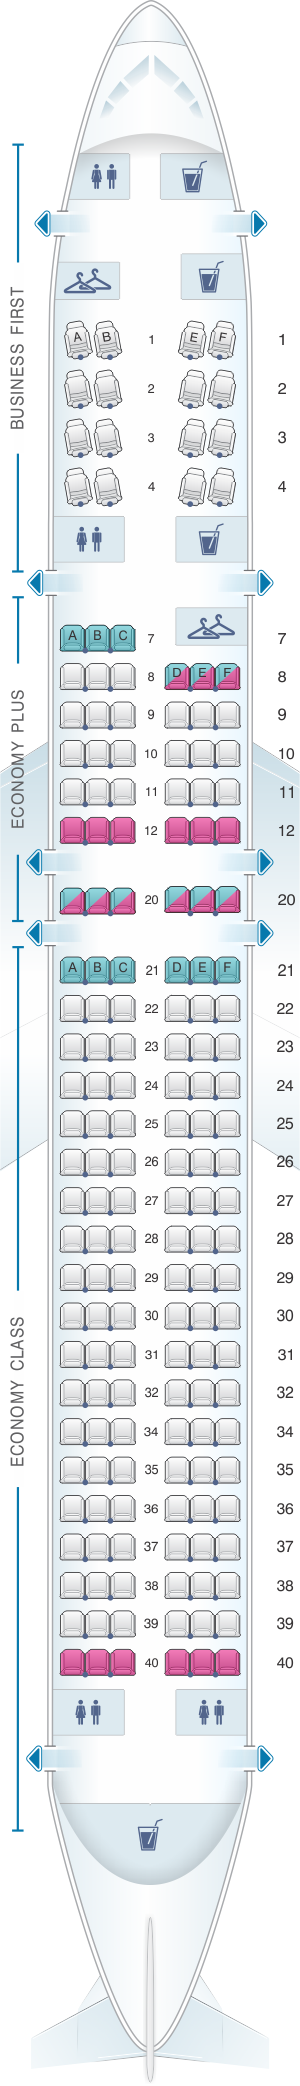 United Airlines Plane Seating Map